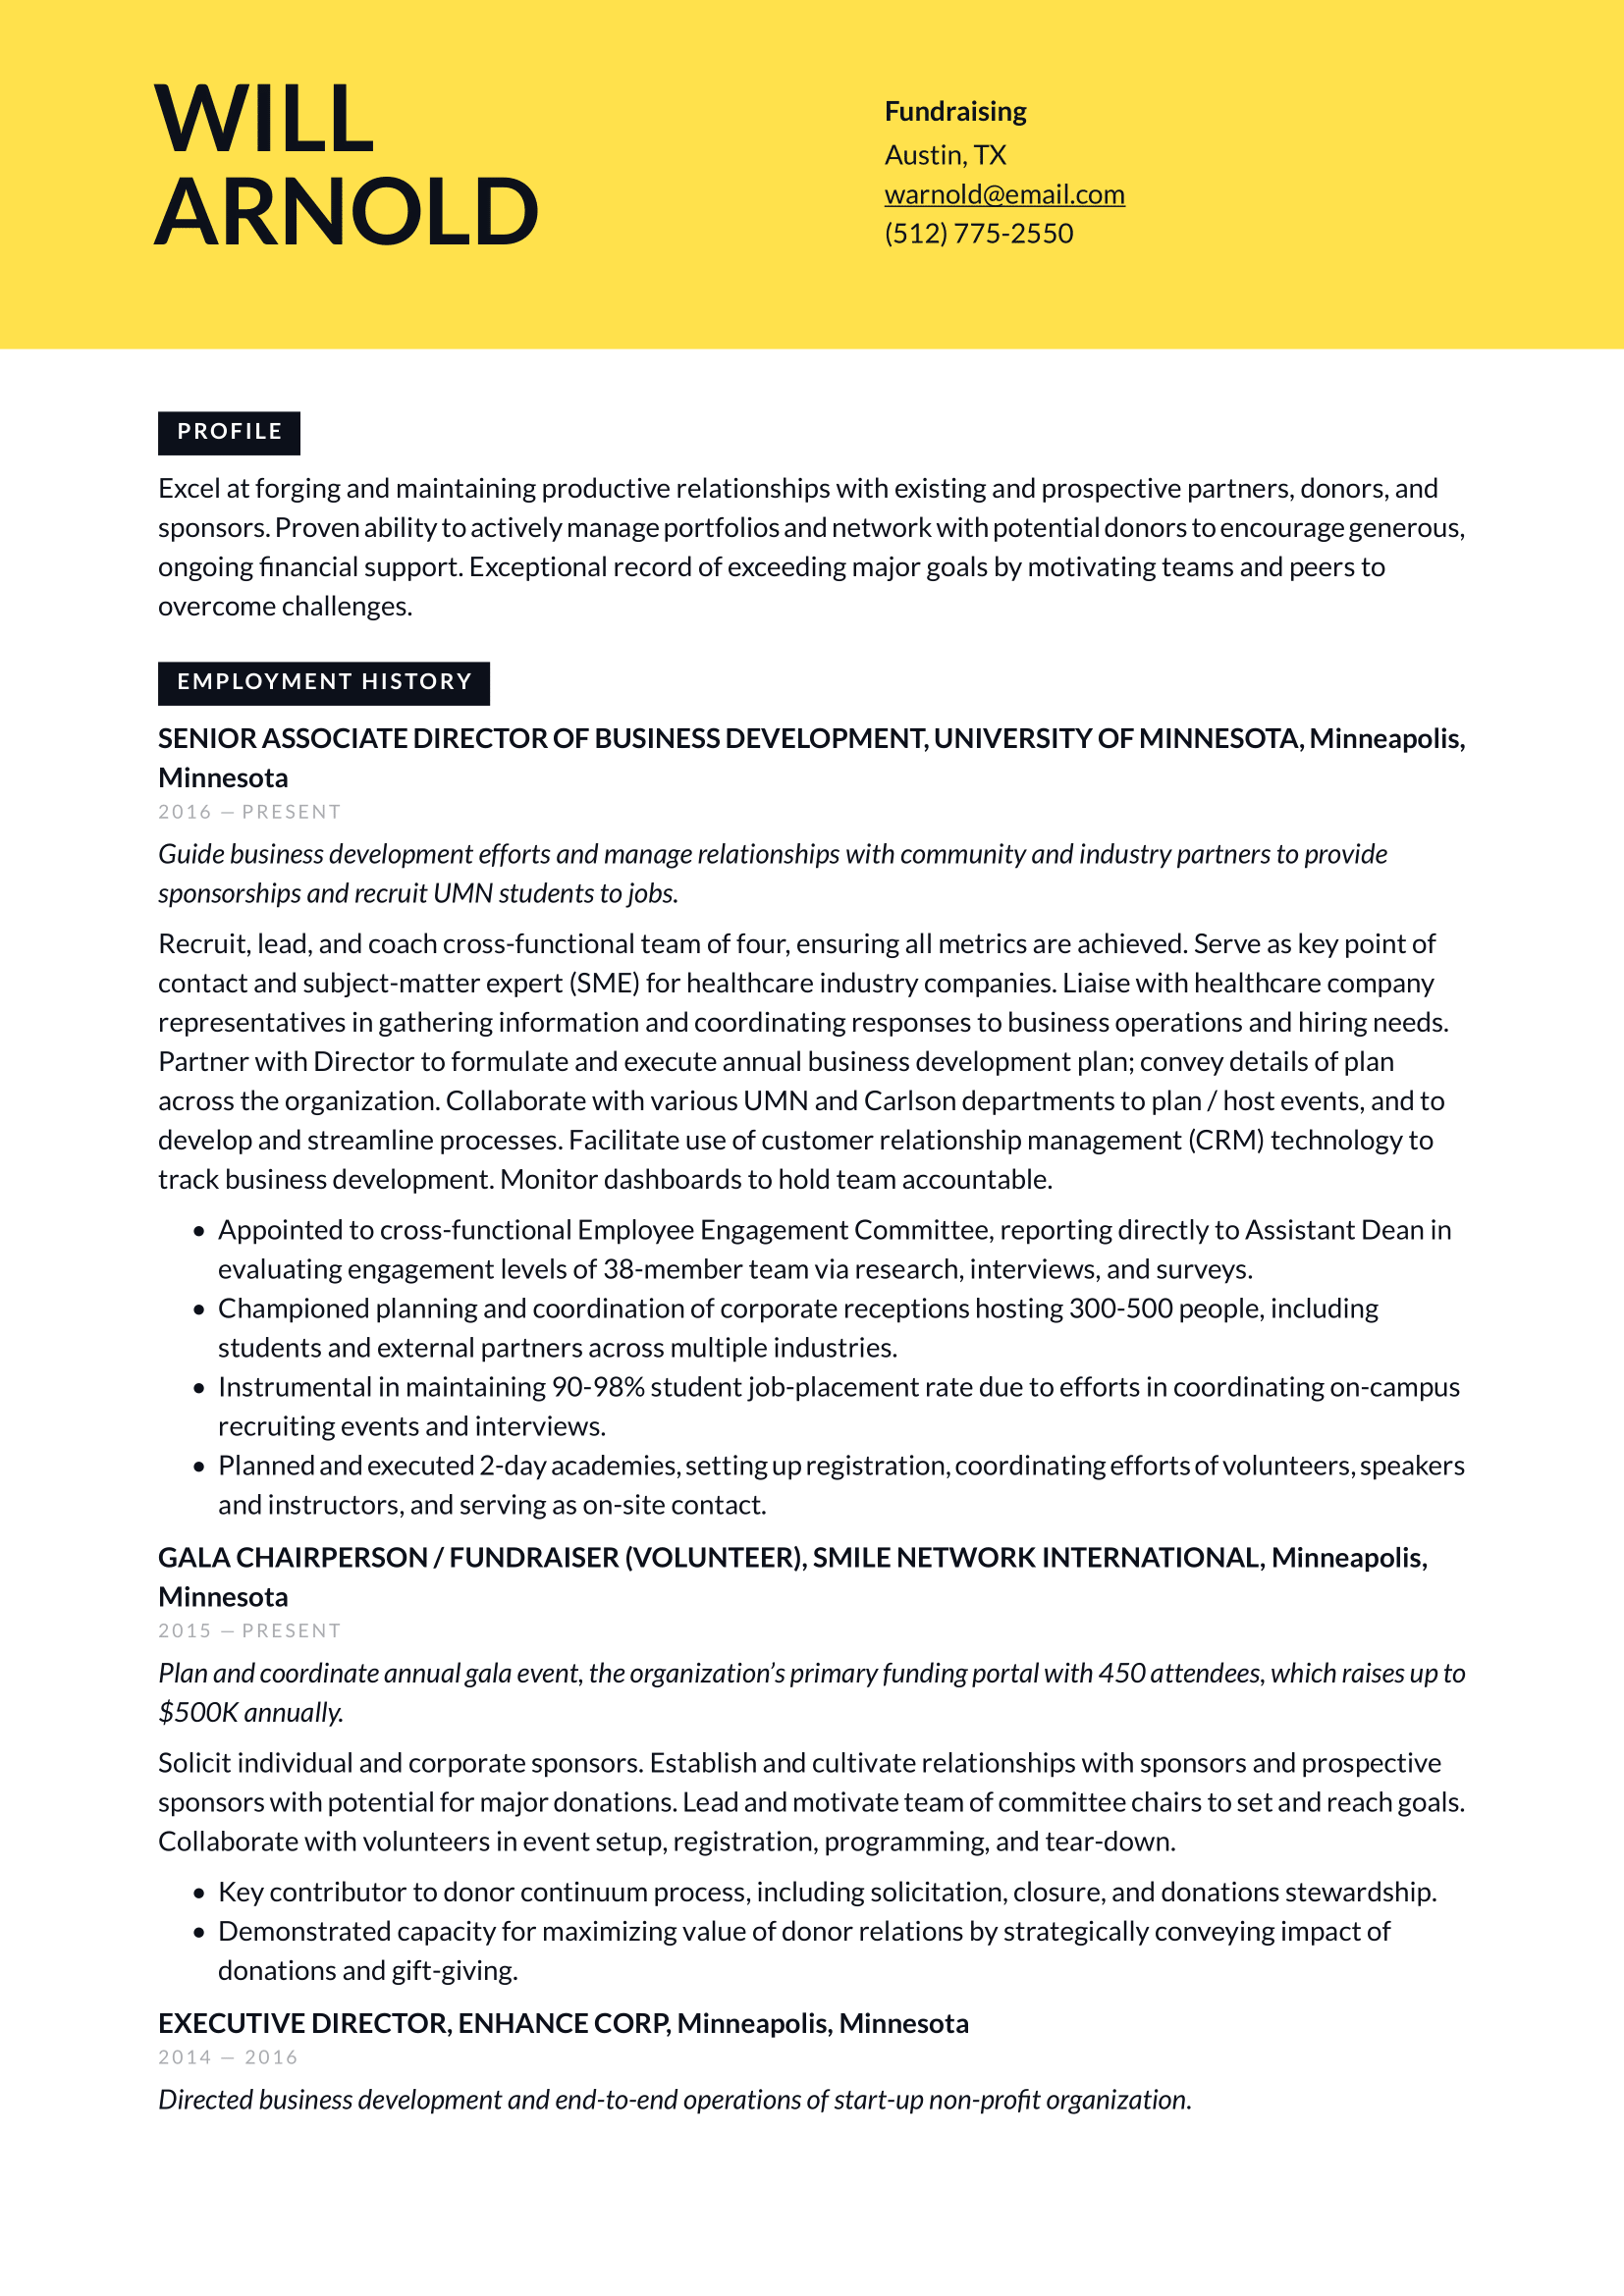 Fundraiser Resume Example & Writing Guide